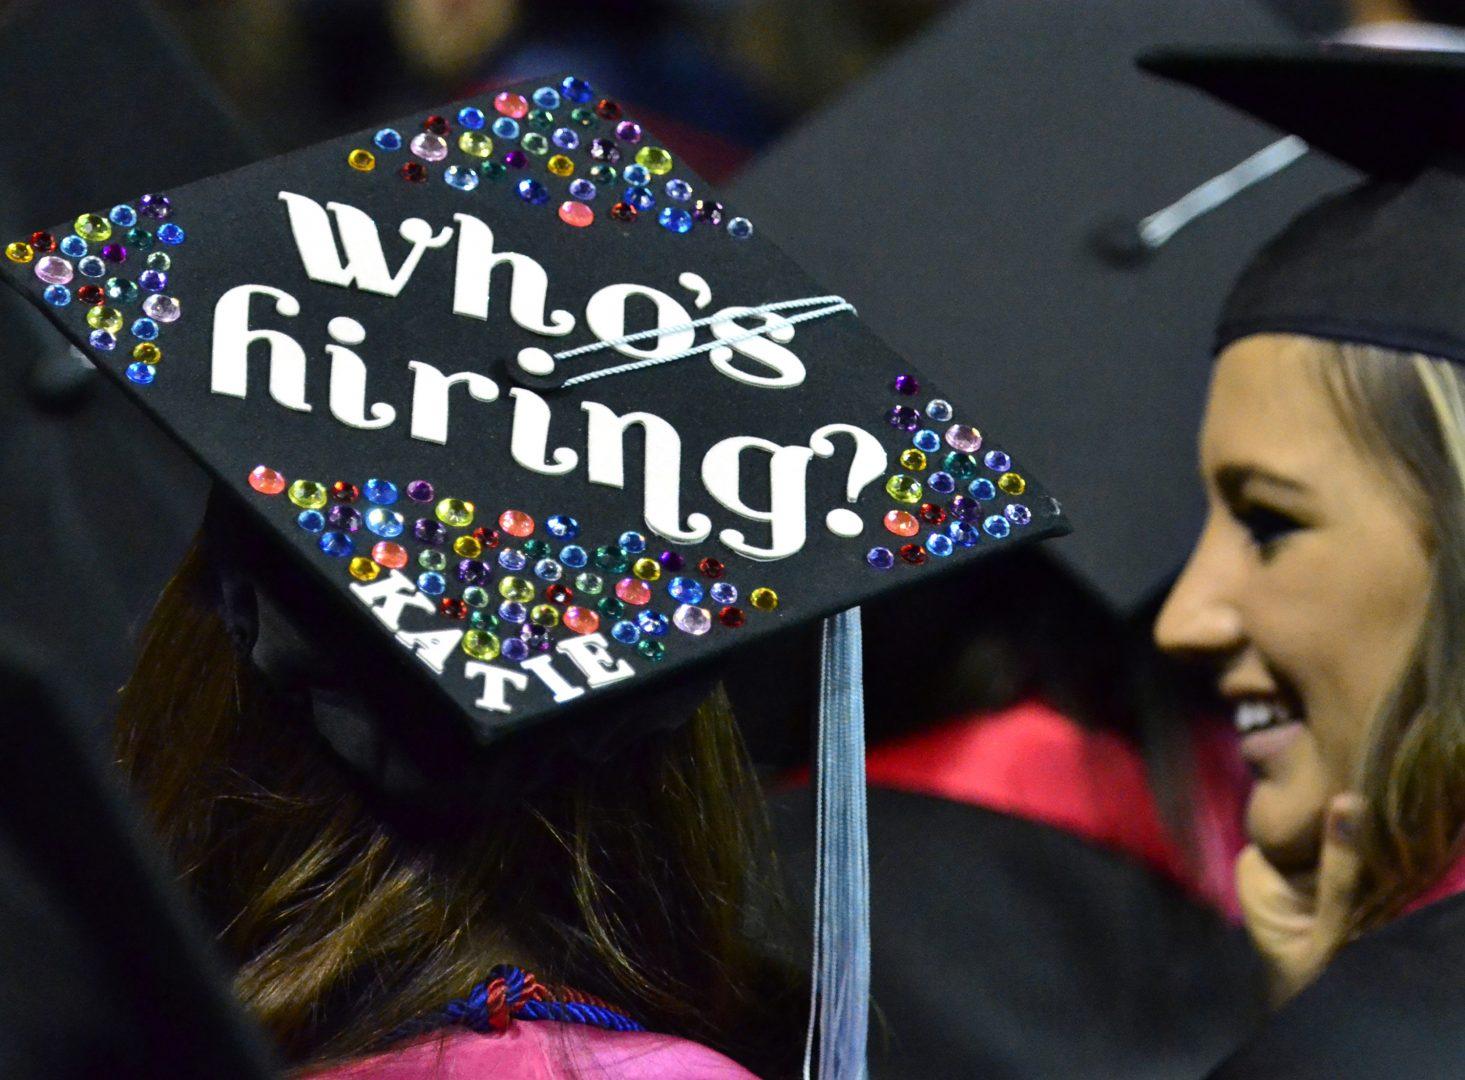 Many of the caps of the graduates carried messages, such as the one by Kara Crookston, left, during Fresno State Universitys 101st Commencement at the Save Mart Center in Fresno, California, on Saturday, May 19, 2012. (John Walker/Fresno Bee/MCT)